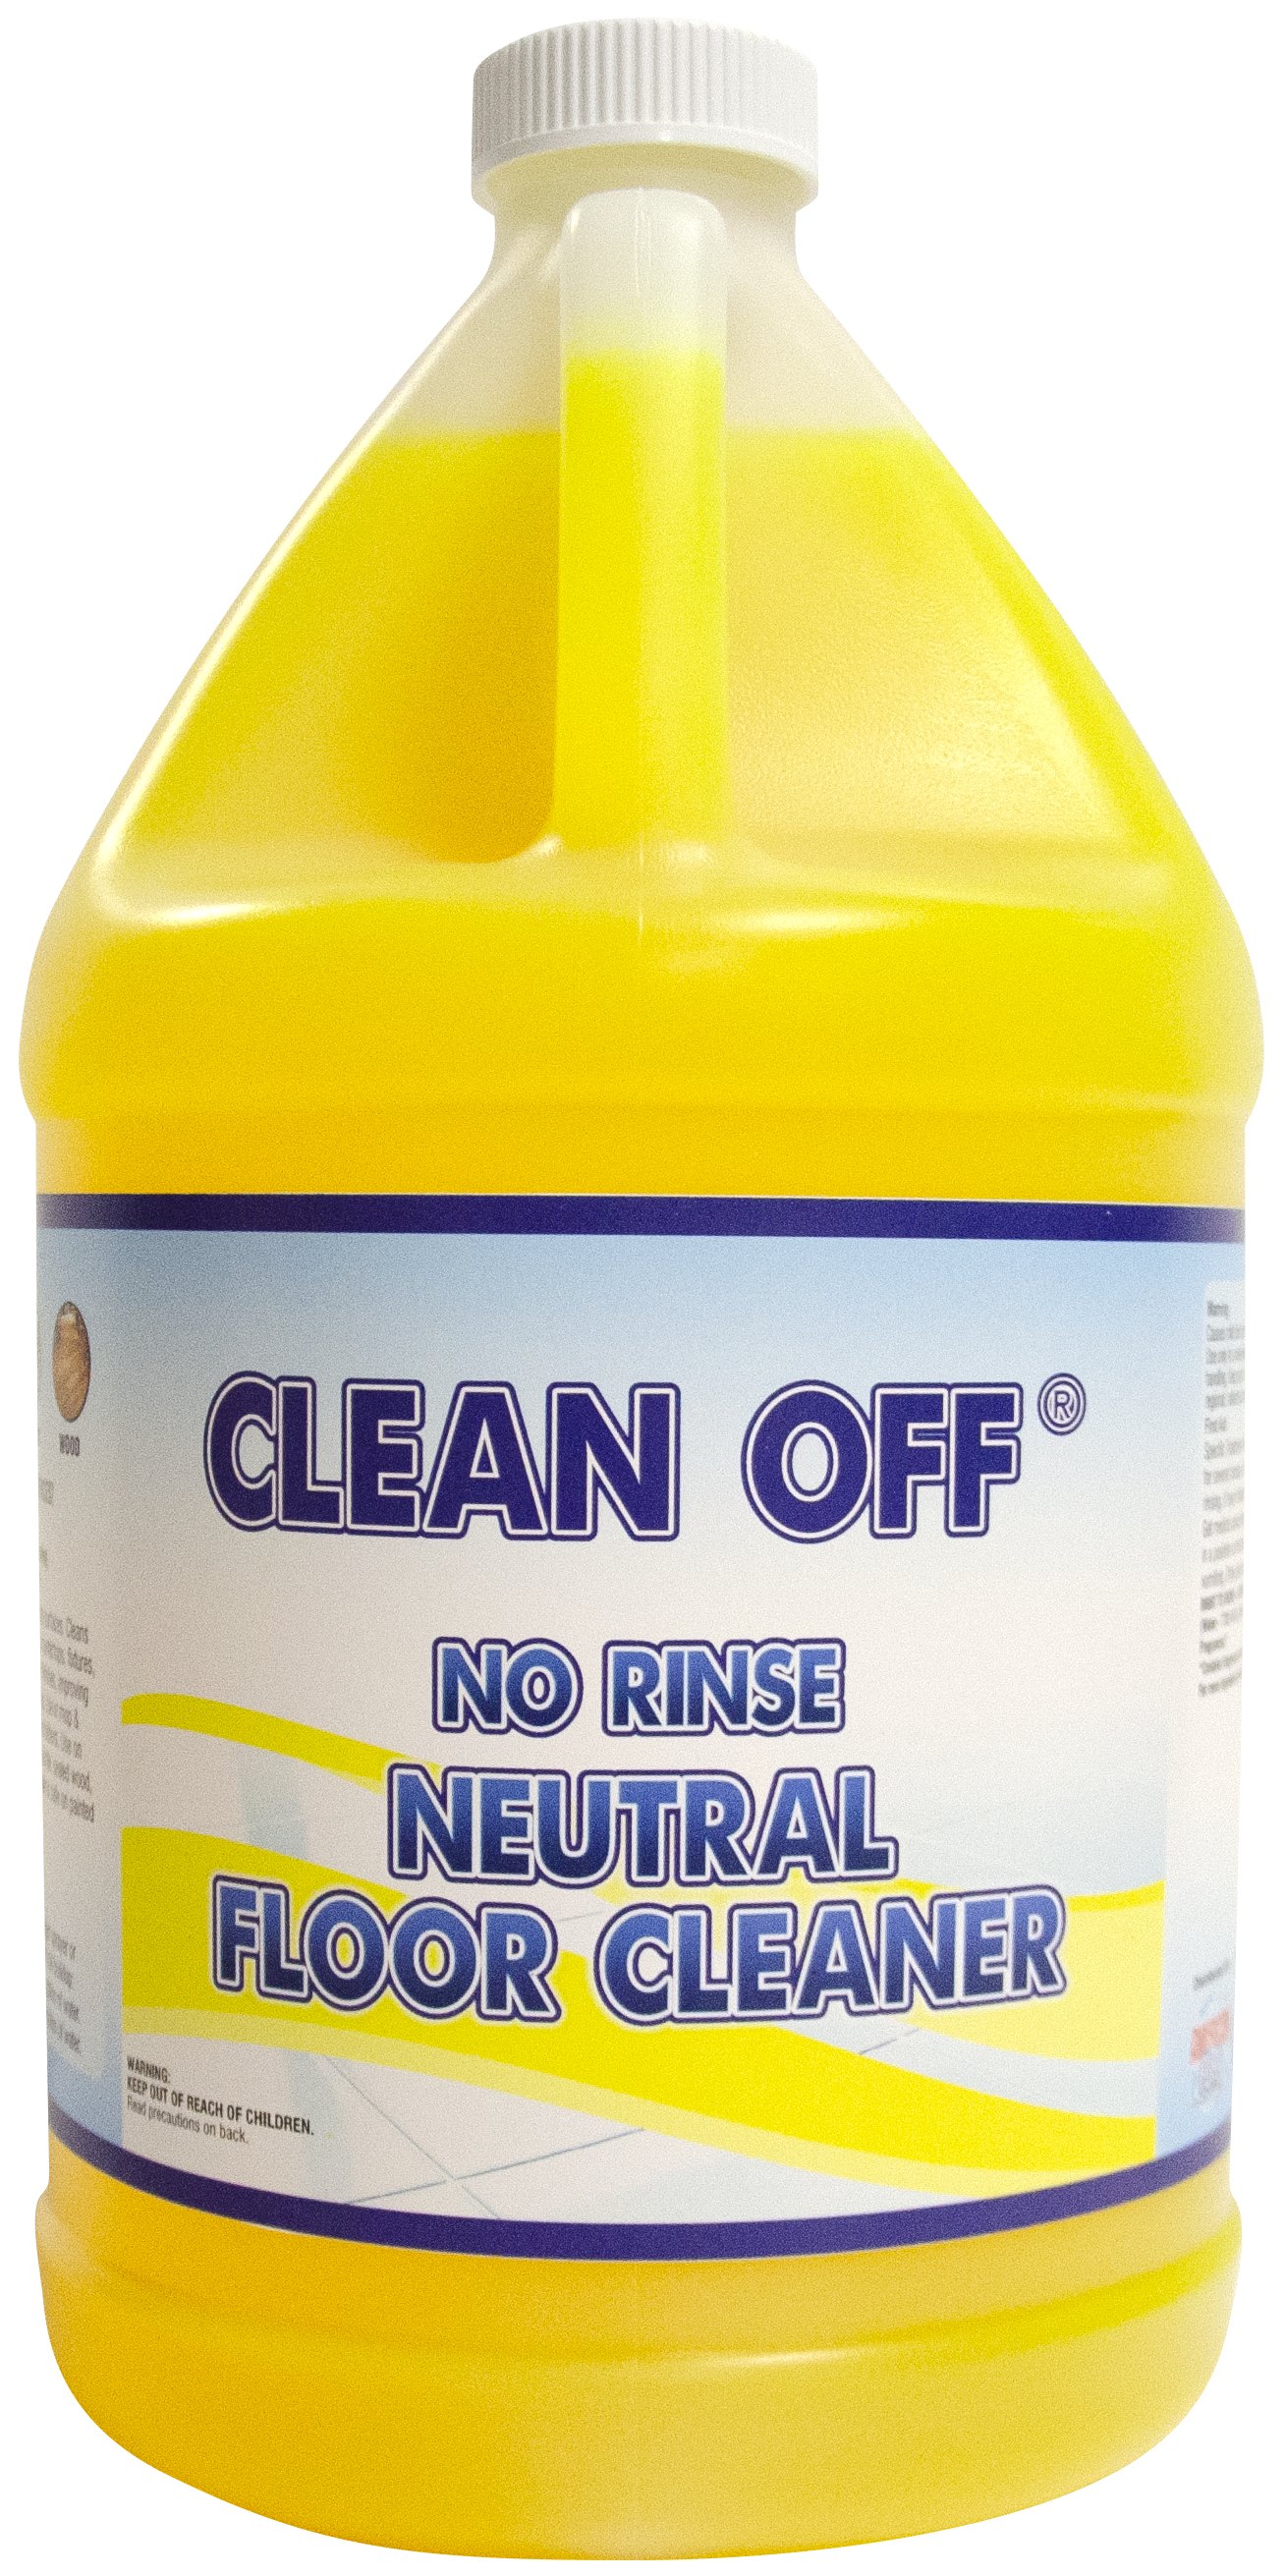 Clean Off No Rinse Neutral Floor Cleaner